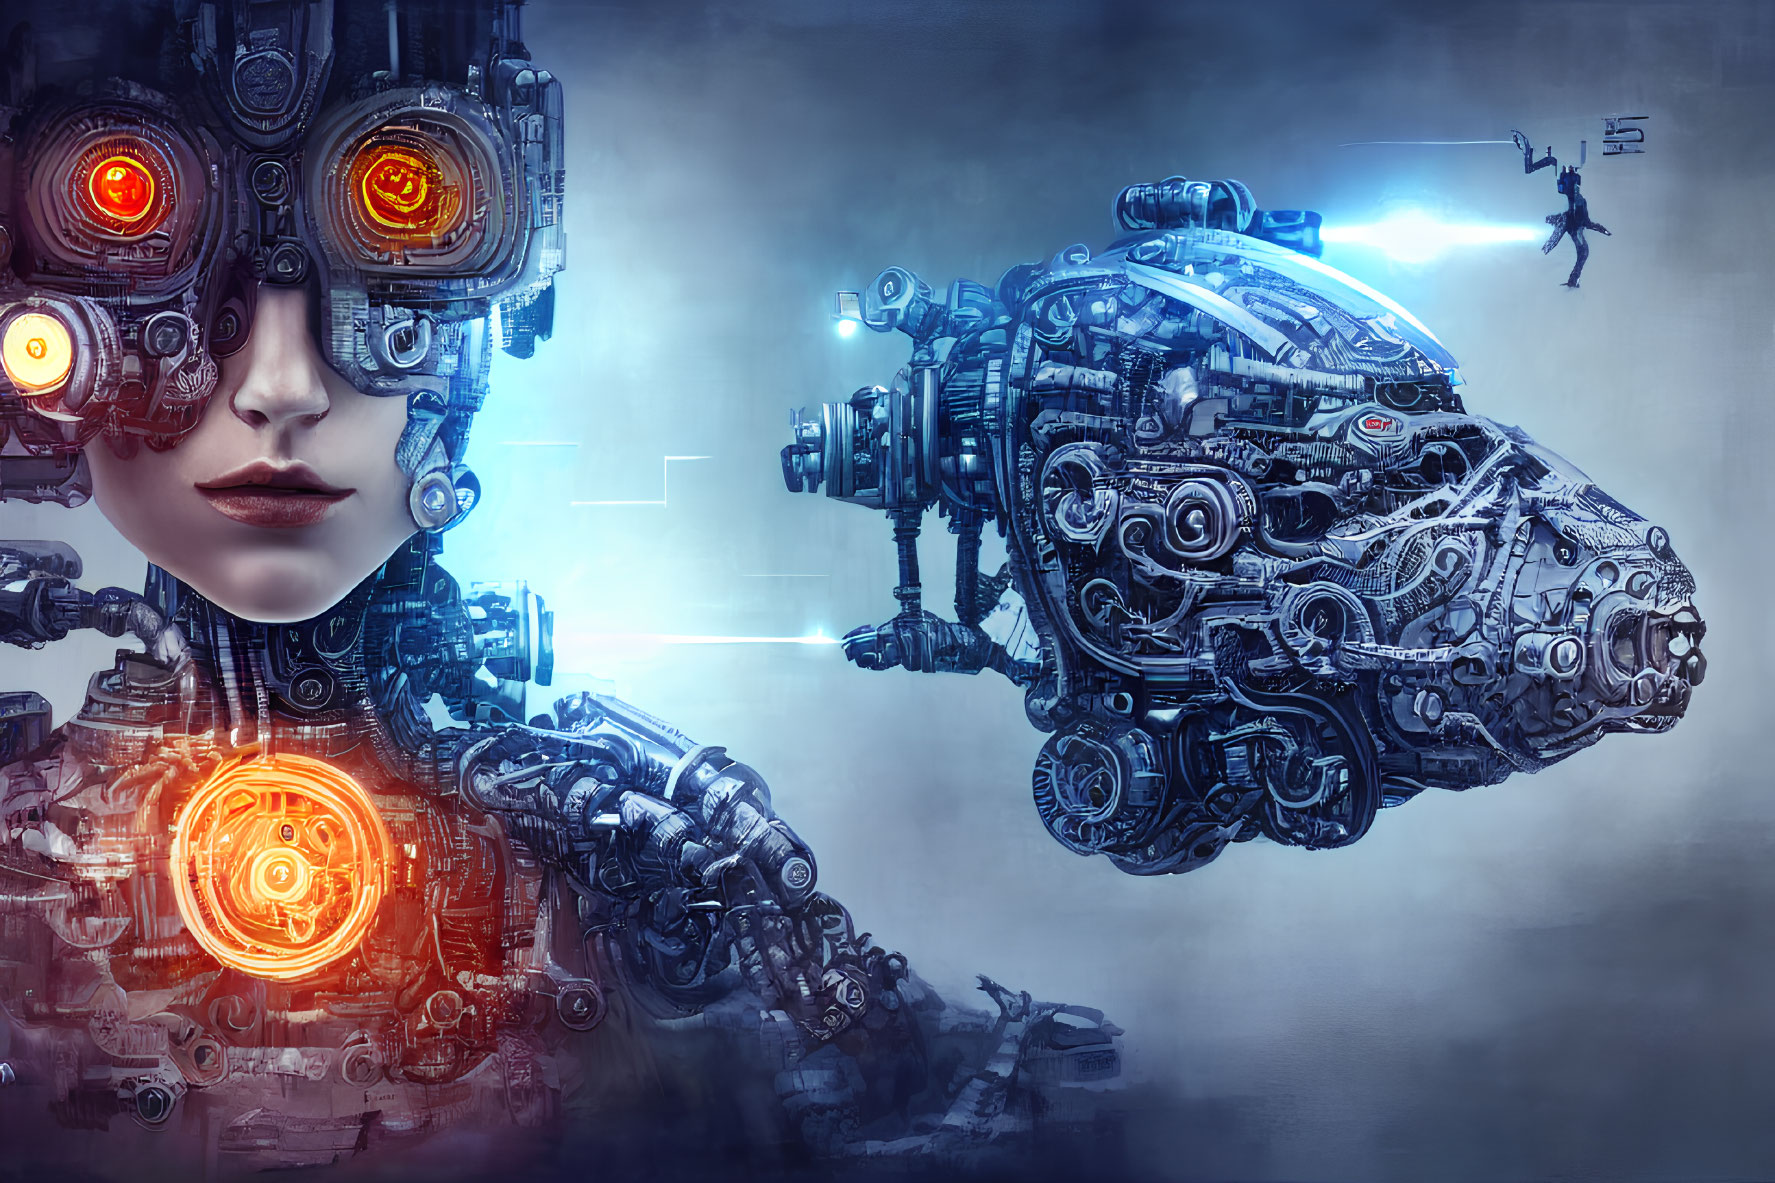 Digital artwork of cyborg woman with mechanical details and futuristic elements